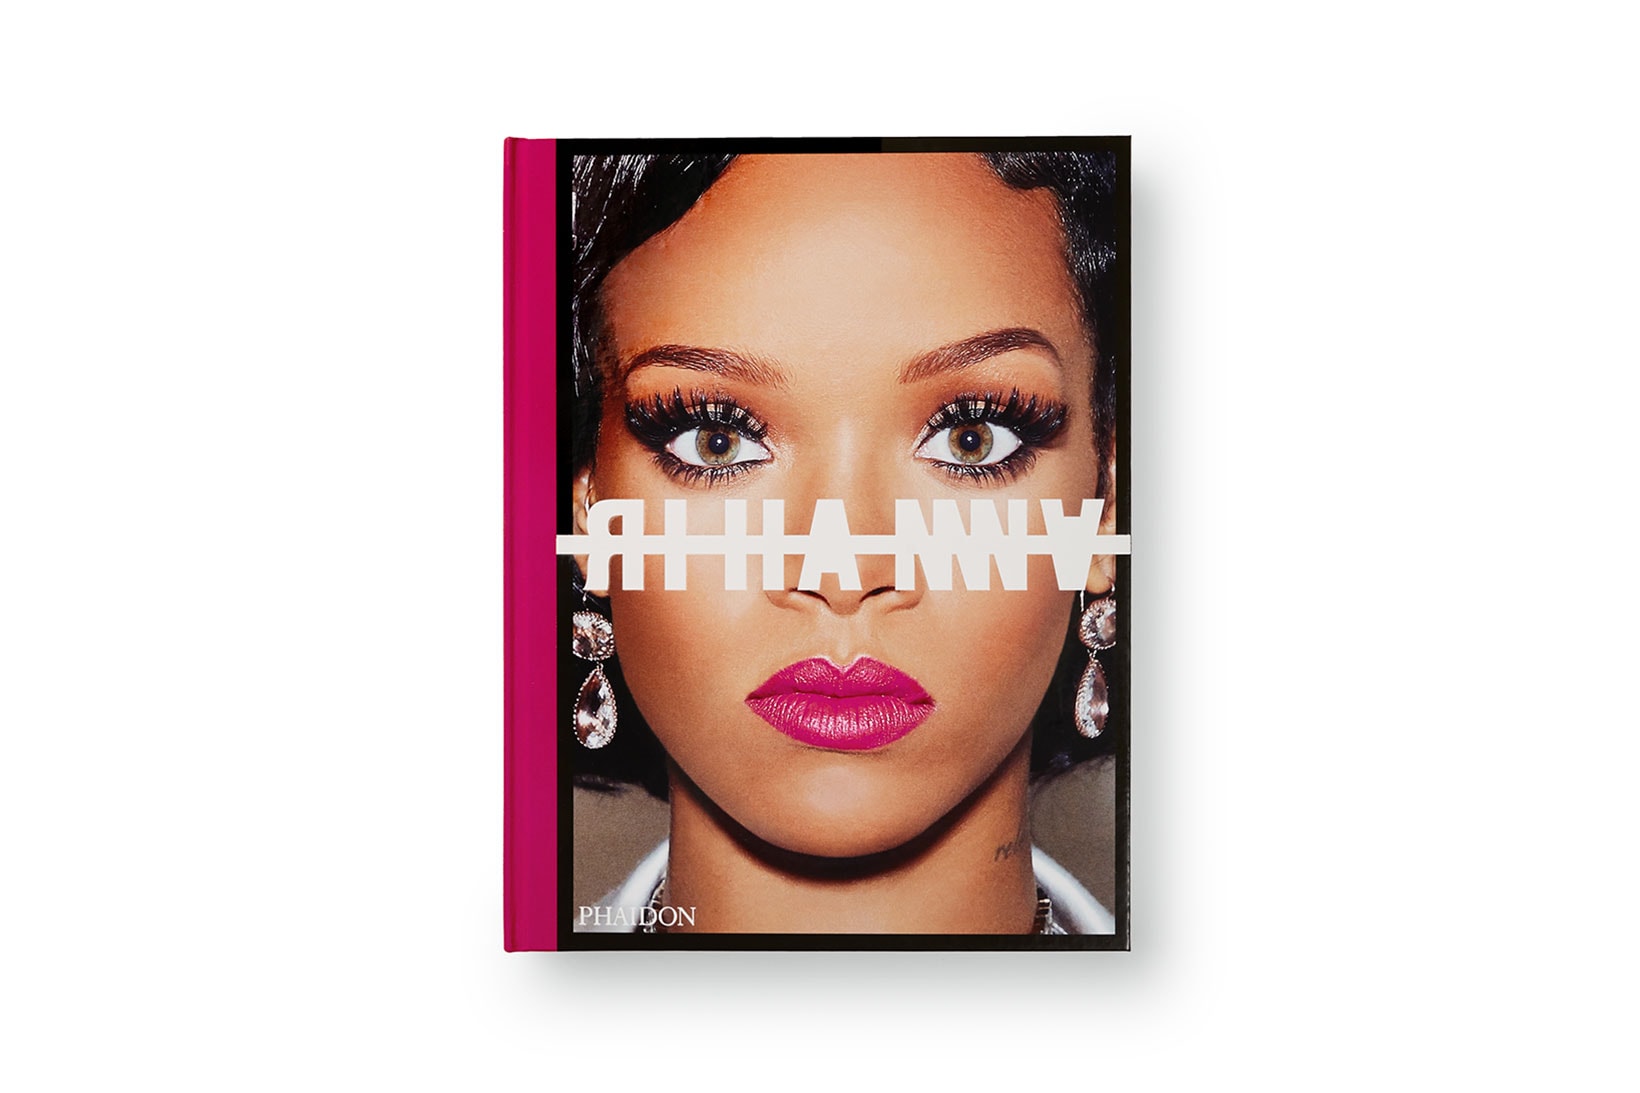 rihanna book autobiography phaidon singer haas brothers design cover